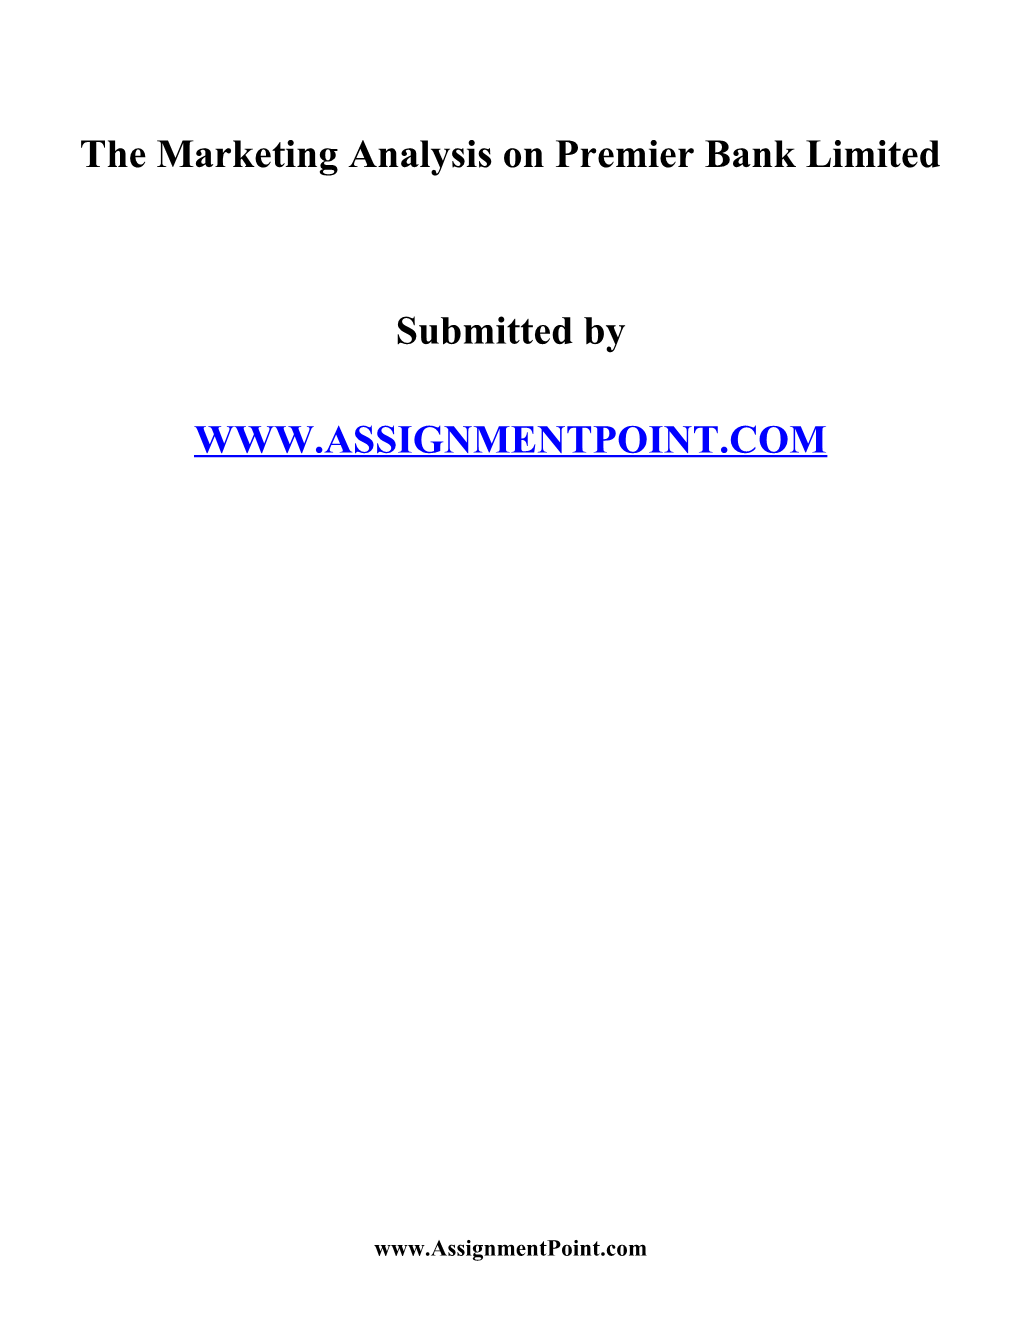 The Marketing Analysis on Premier Bank Limited